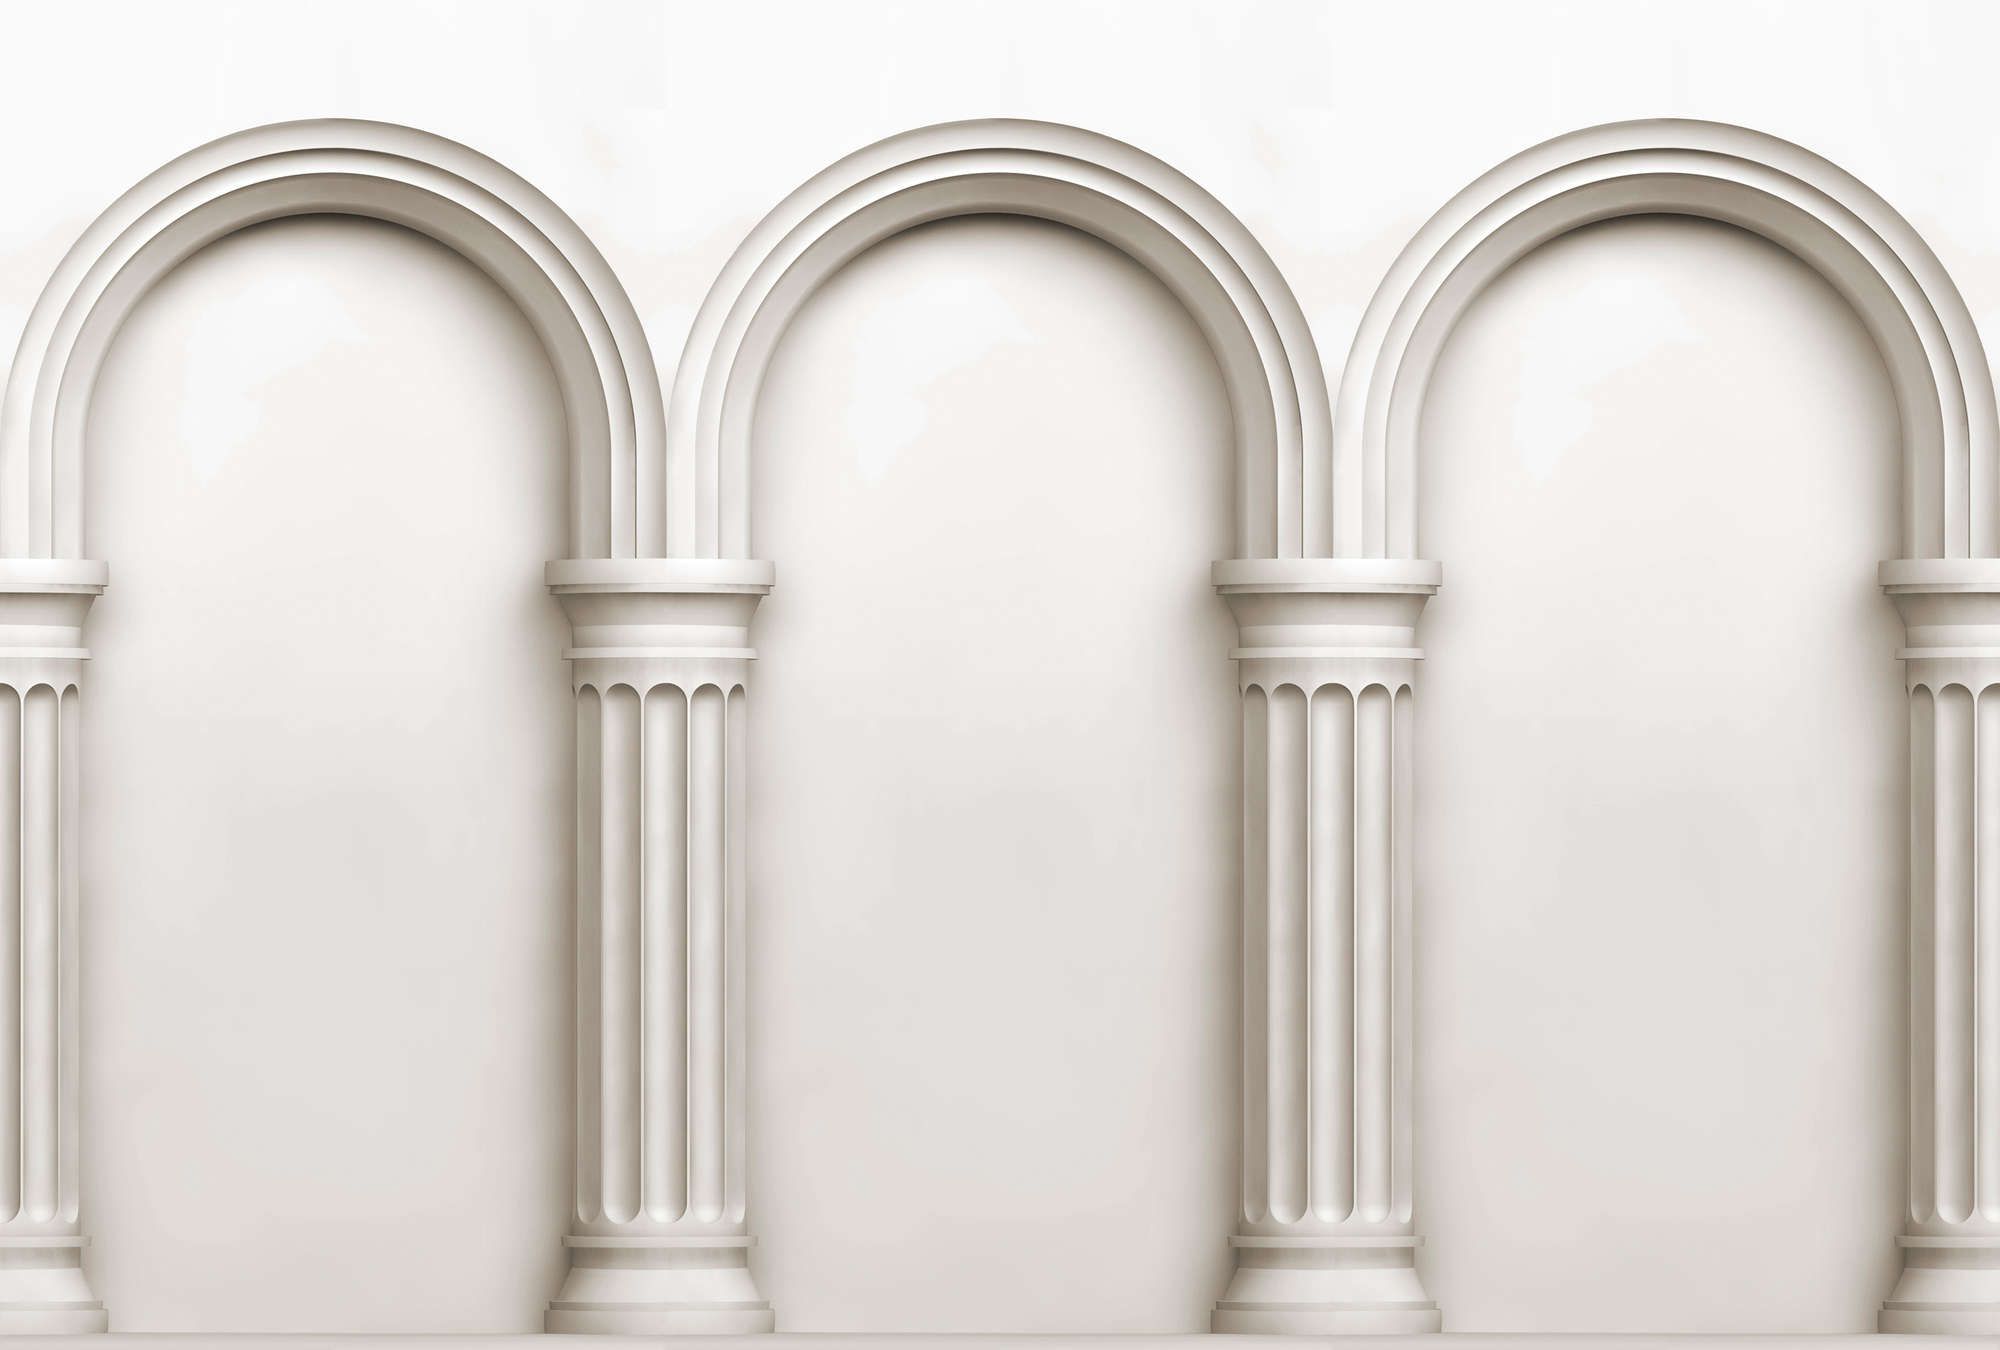             Photo wallpaper »new roman« - Architecture with round arches - Smooth, slightly shiny premium non-woven fabric
        